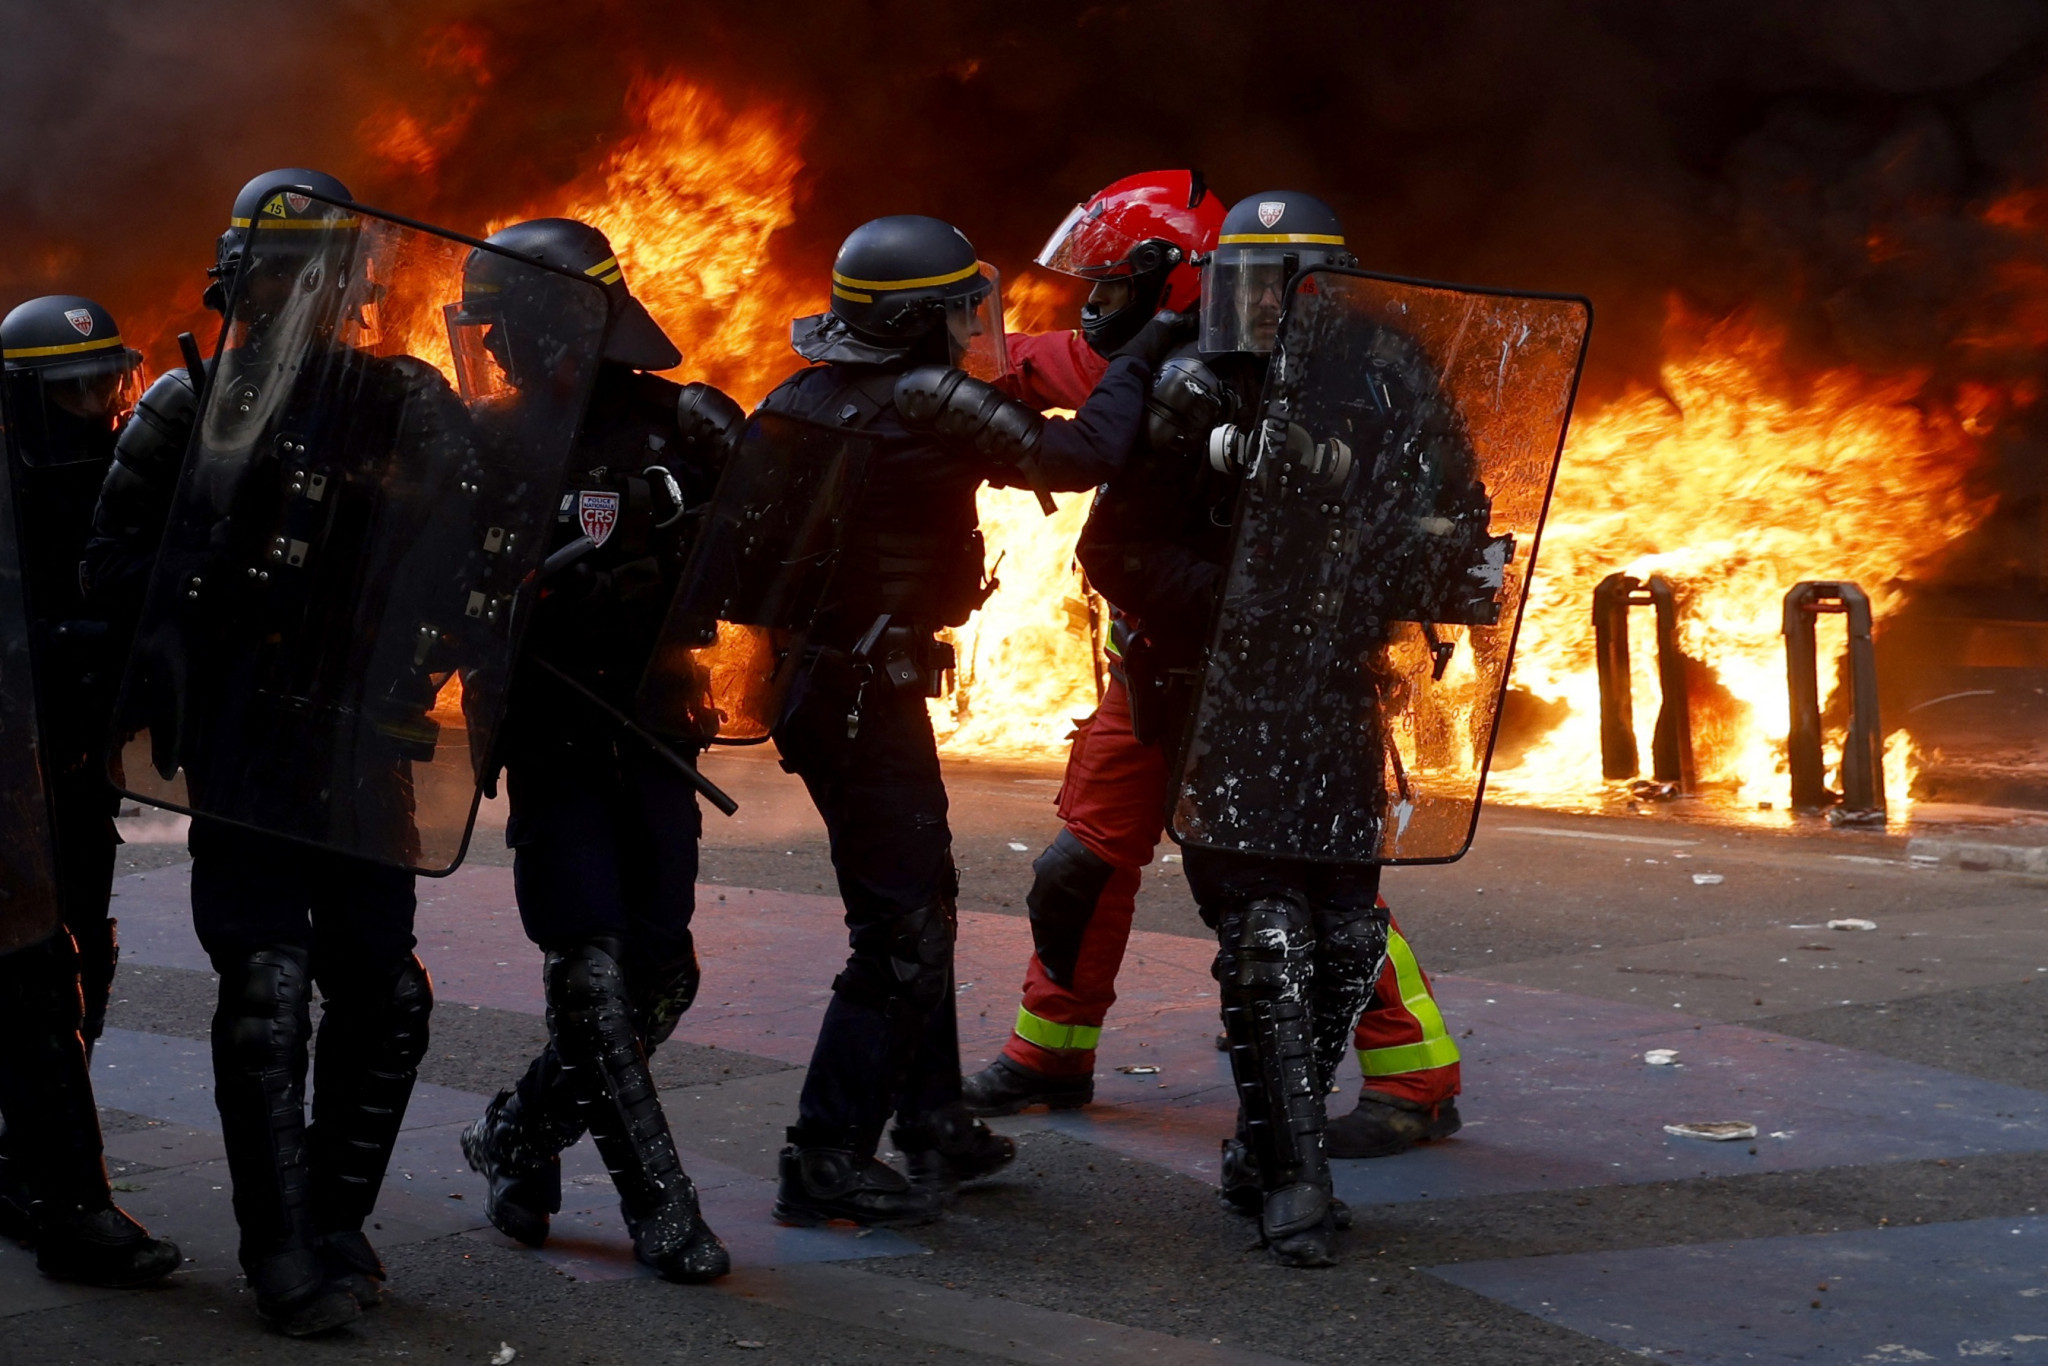 A bicycle-sharing station bursts into flames during the violent demonstrations in Paris ©Getty Images